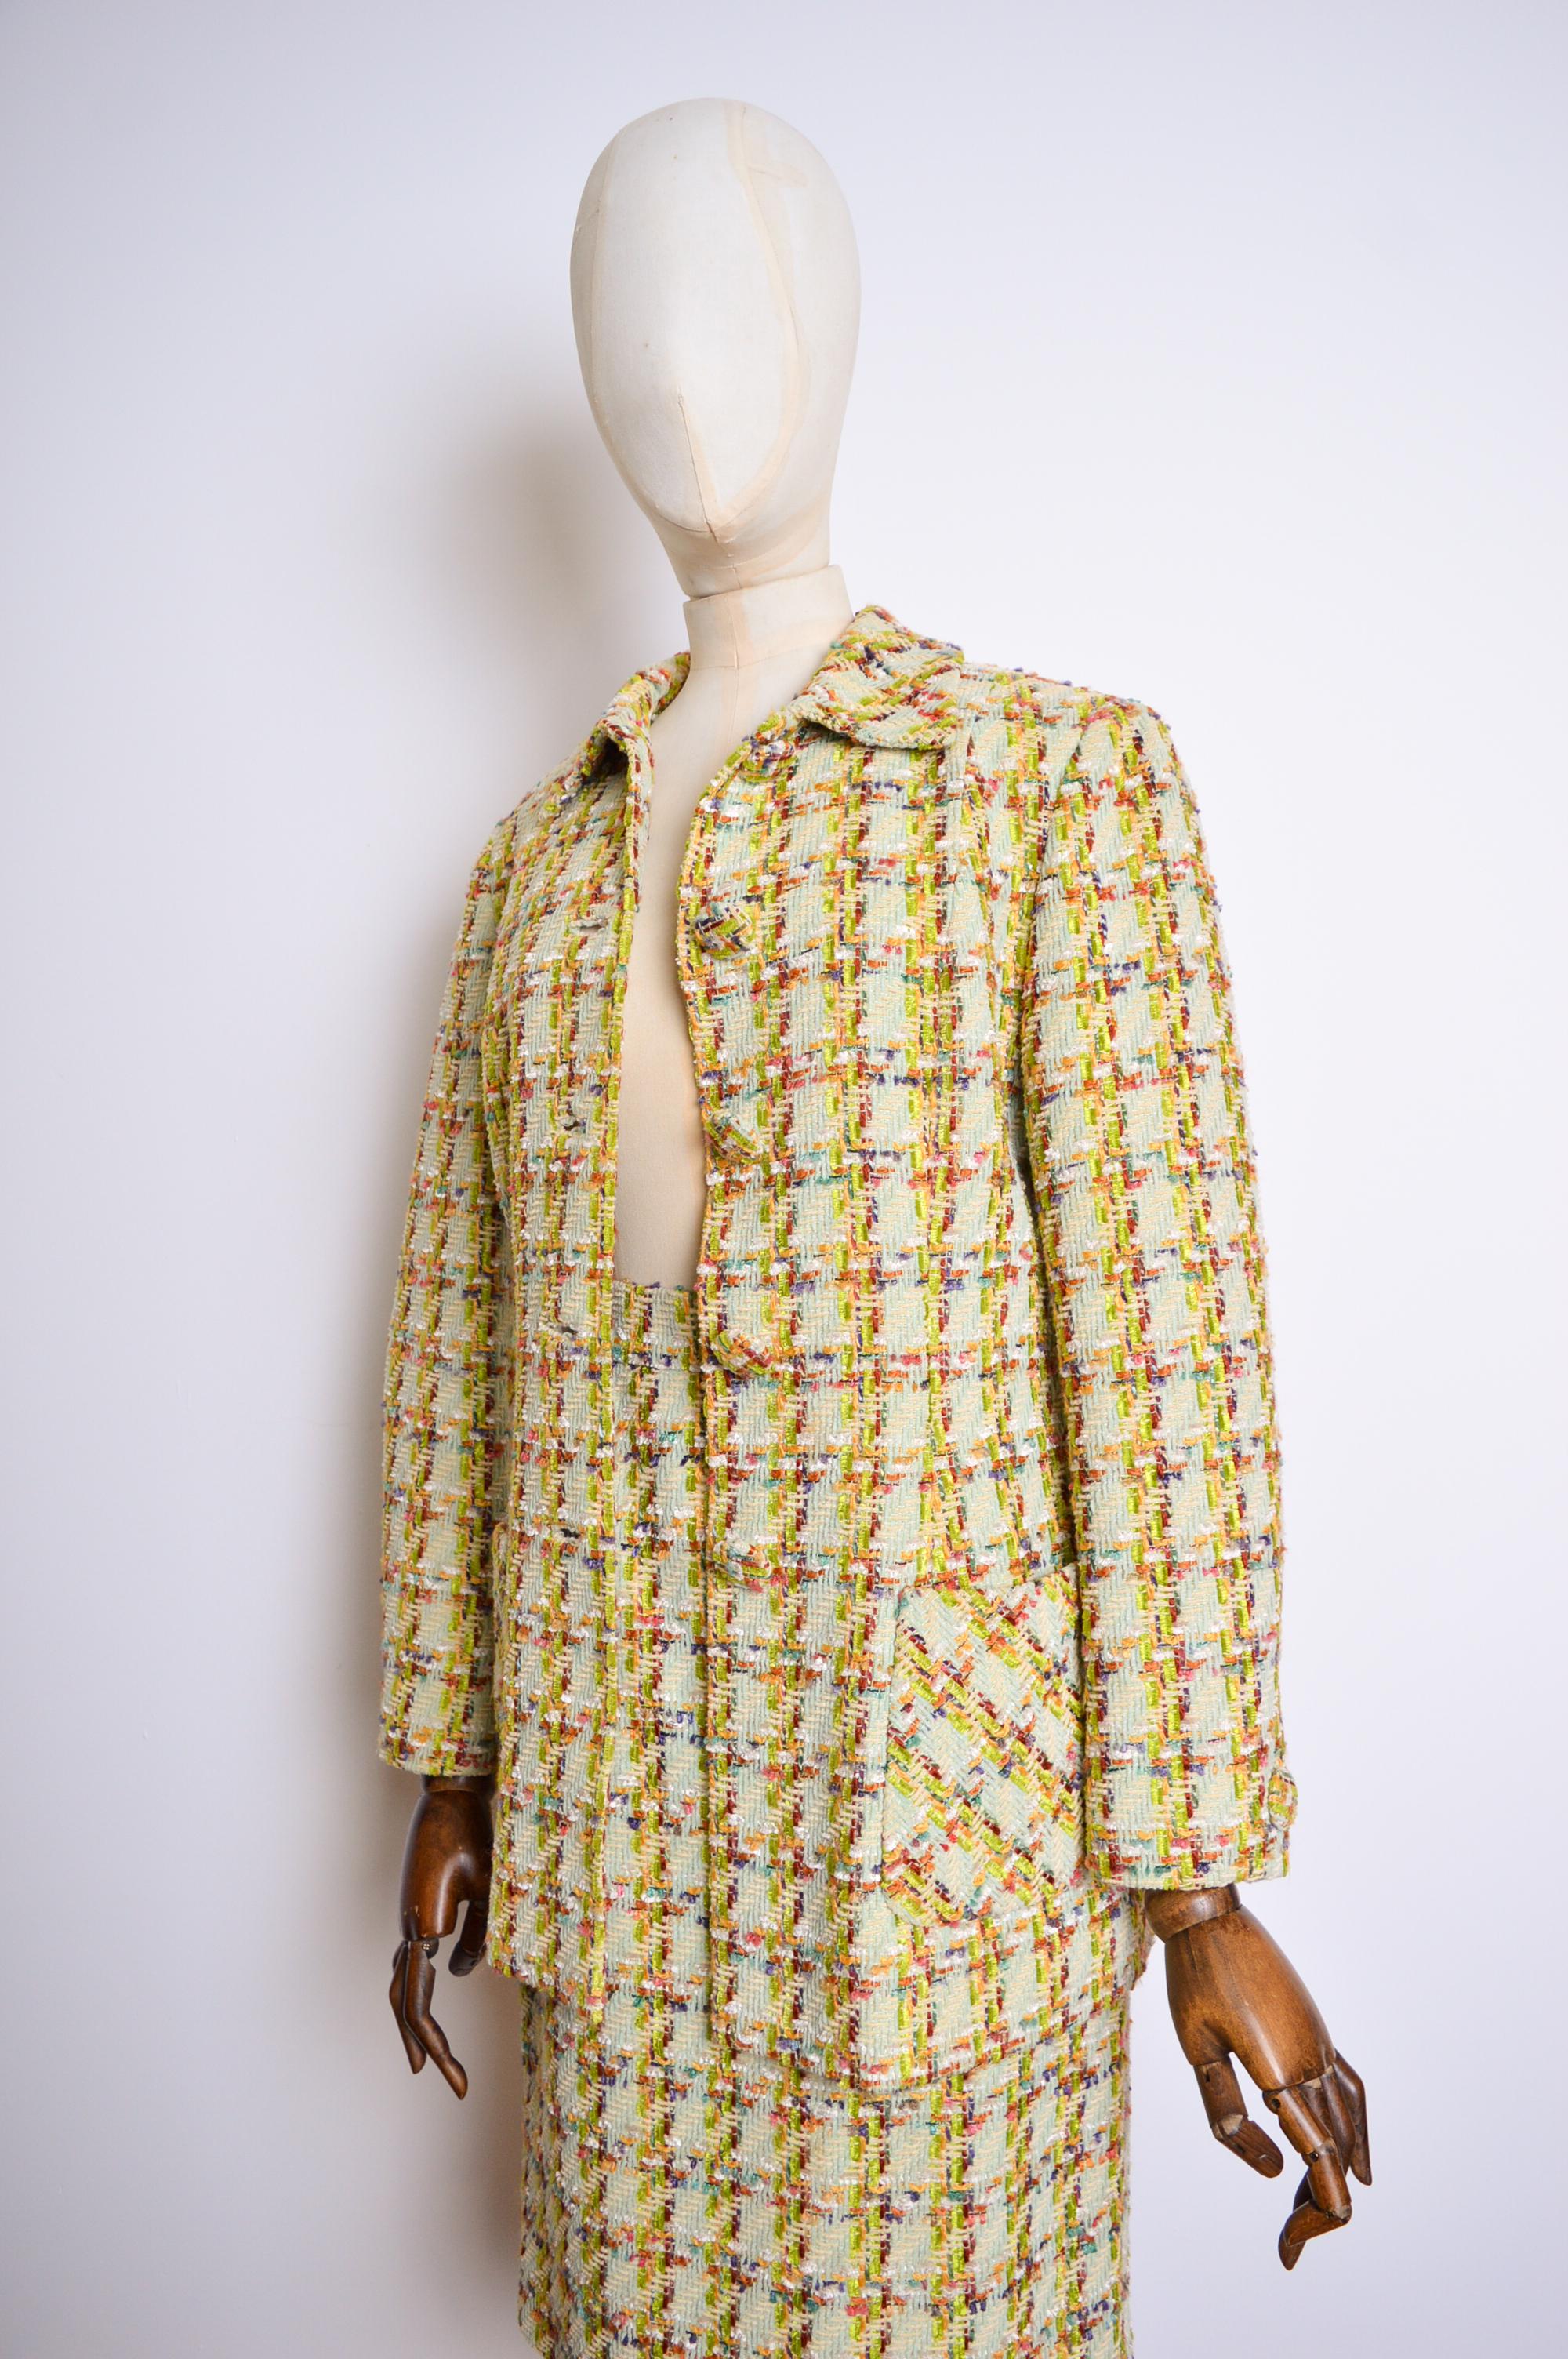 S/S 1993 ROCHAS Jewel Tone Lime Green Tweed Boucle Jacket & Skirt Matching Set For Sale 11